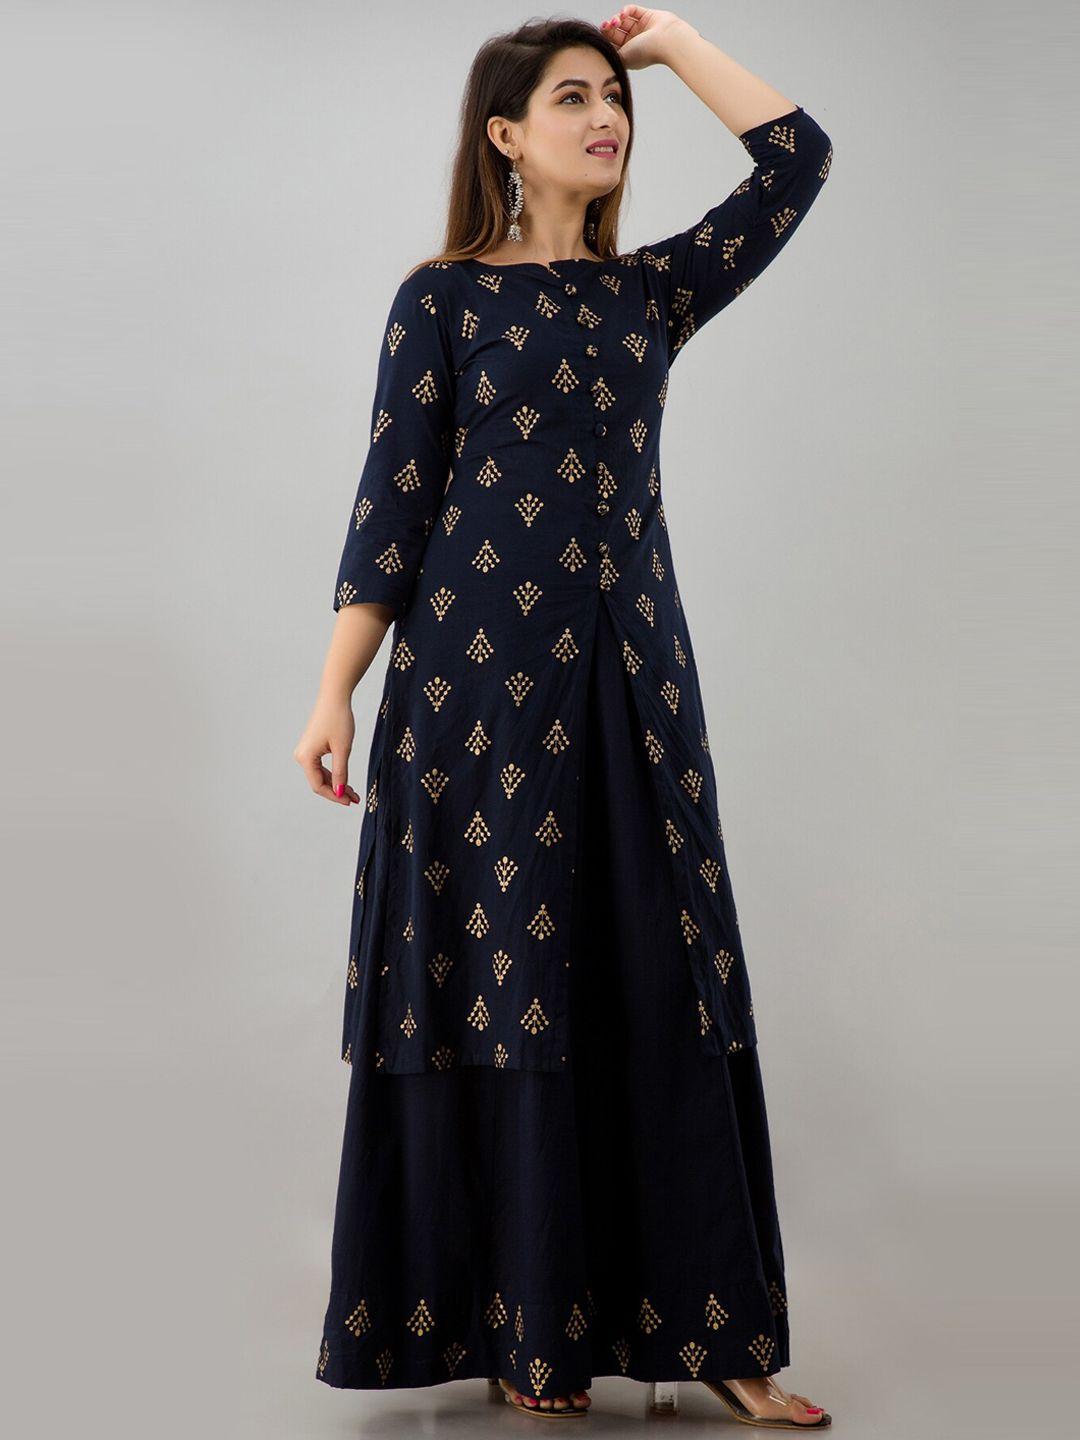 here&now navy blue & gold-toned ethnic motifs printed kurta with skirt